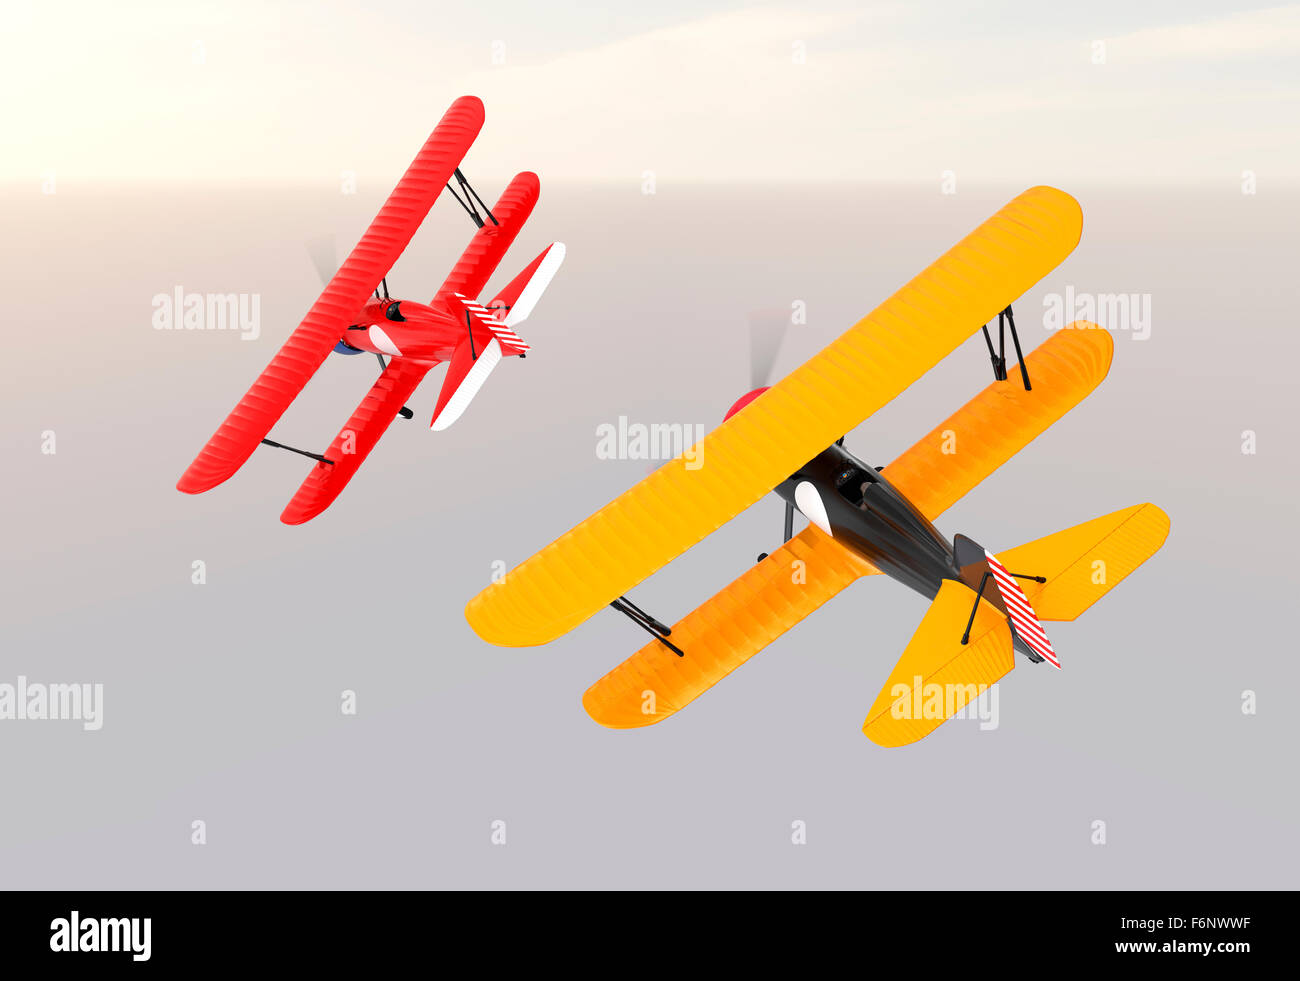 Two biplanes flying in the sky. Stock Photo